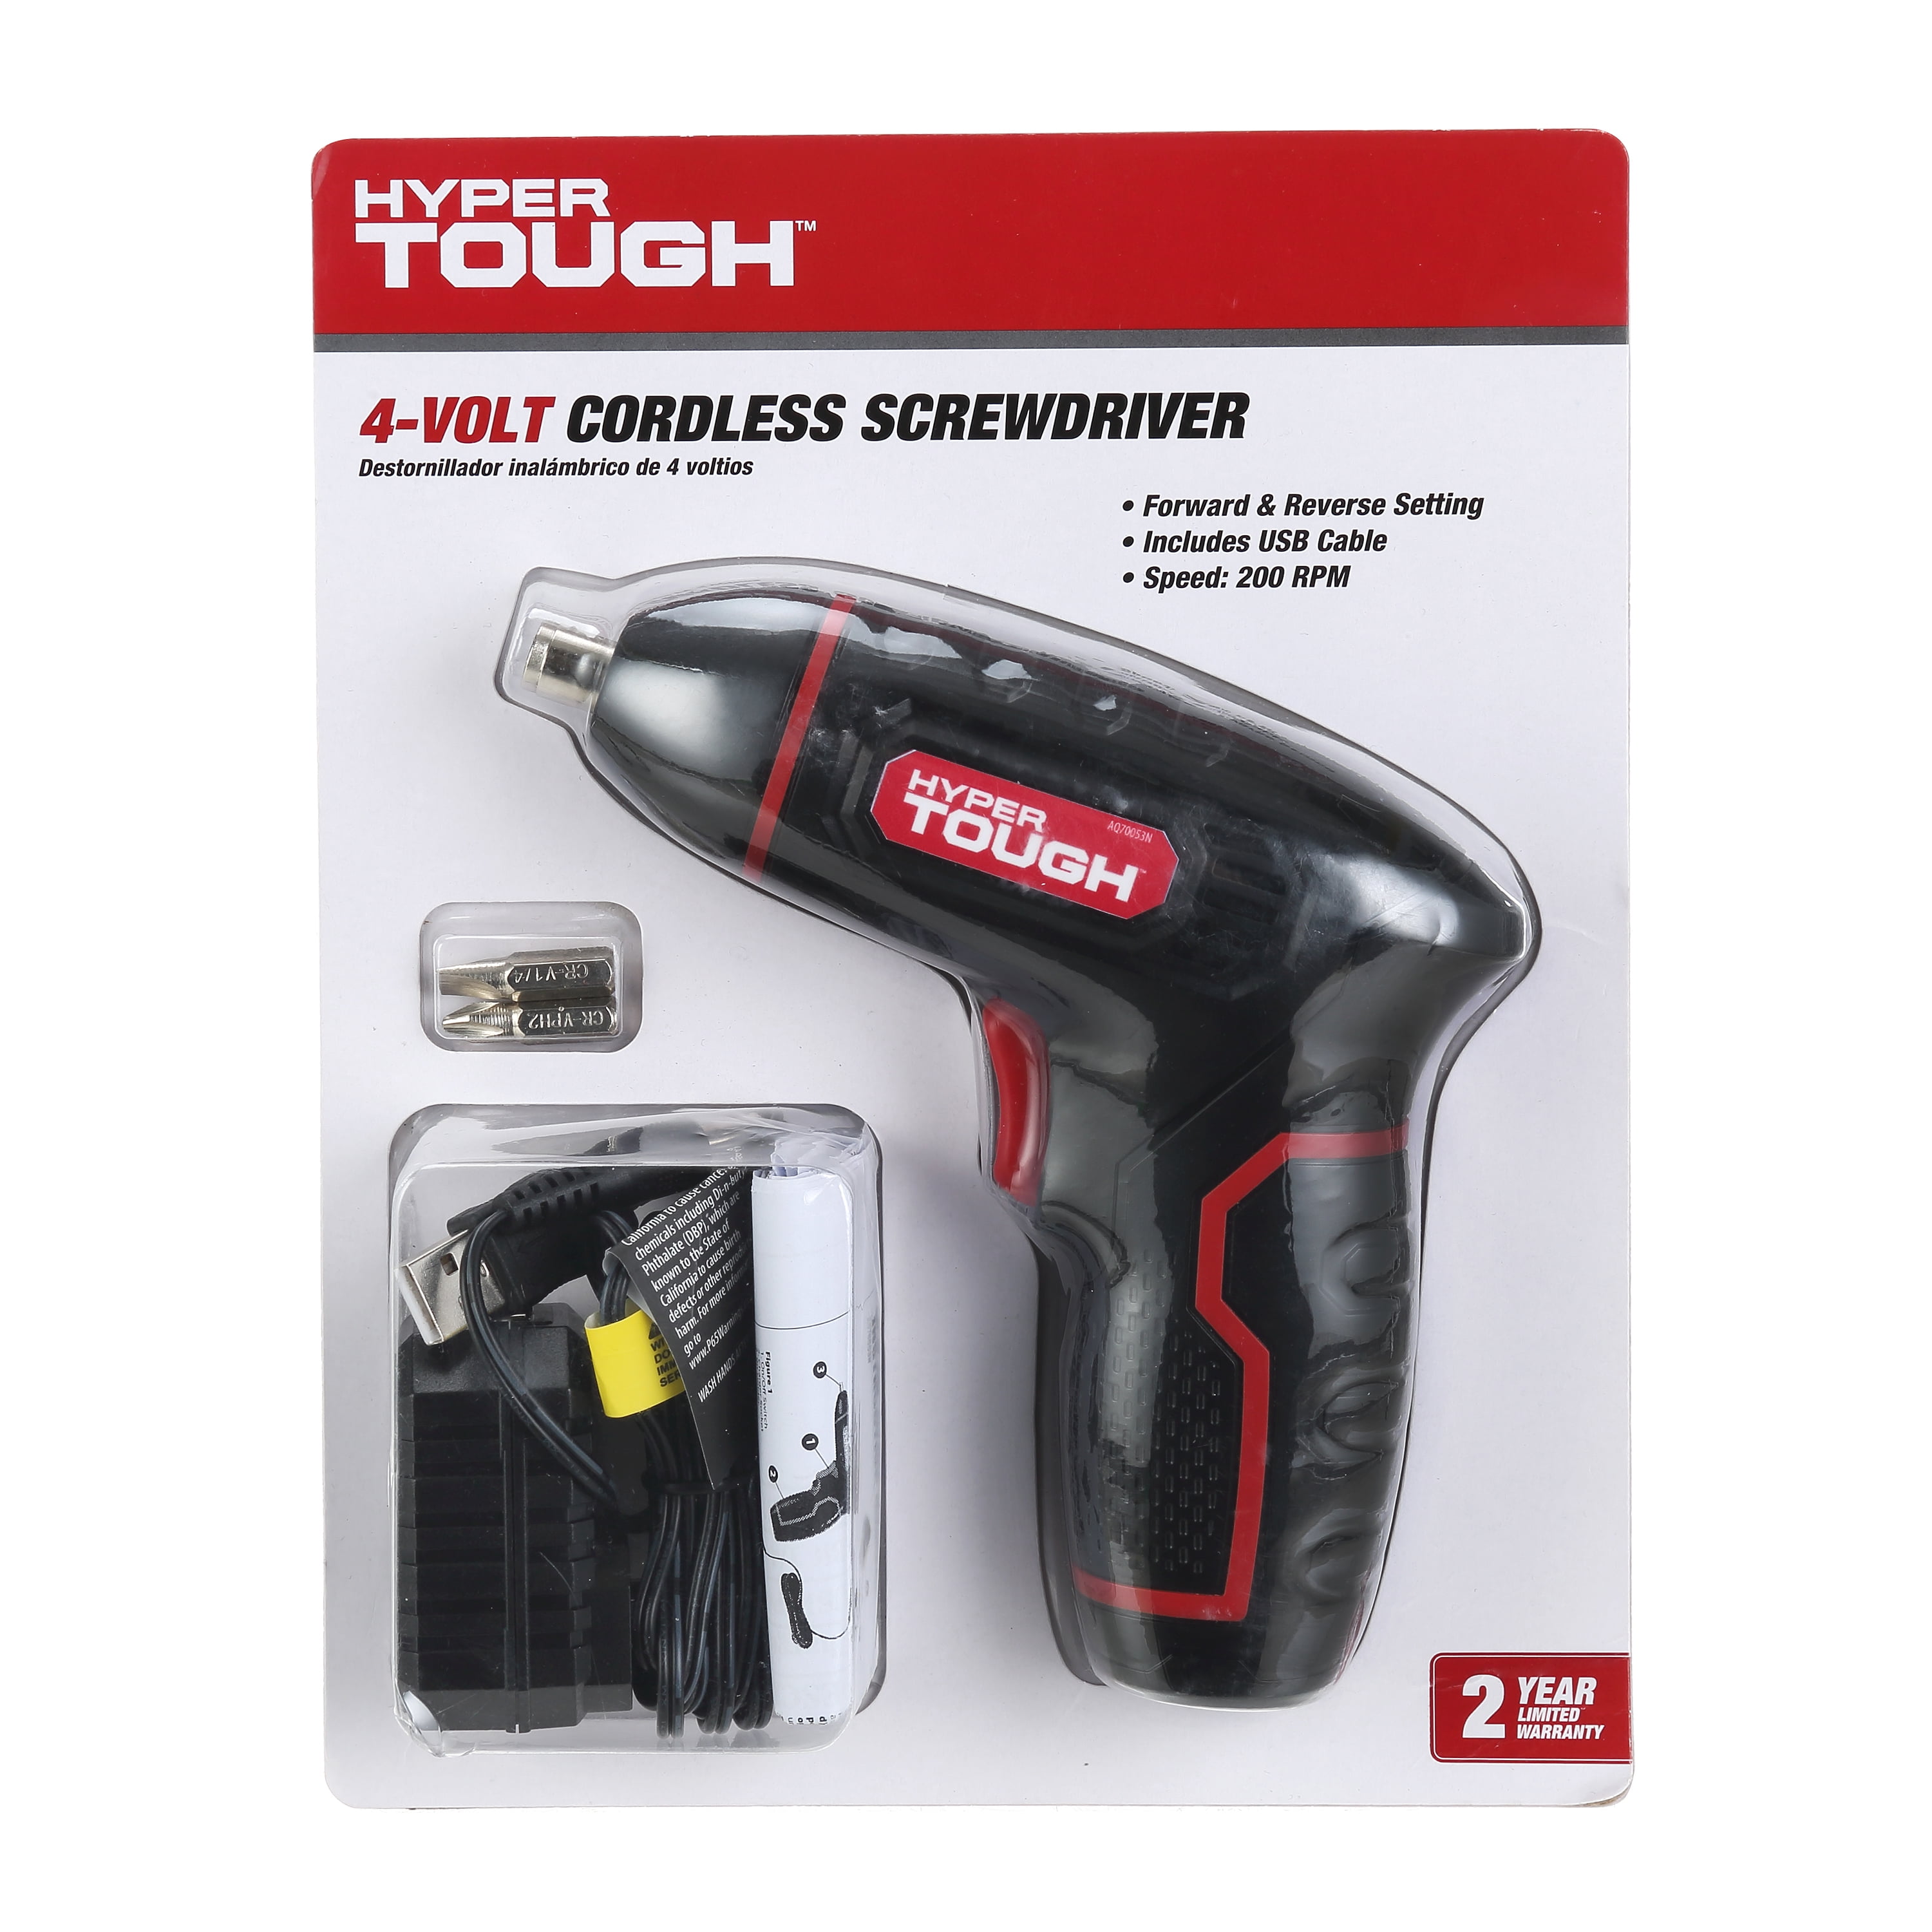 4.8 Volt 1/4 Inch Cordless Screwdriver Kit with Built-in LED Light; Forward and Reverse Operation by Drill Master 